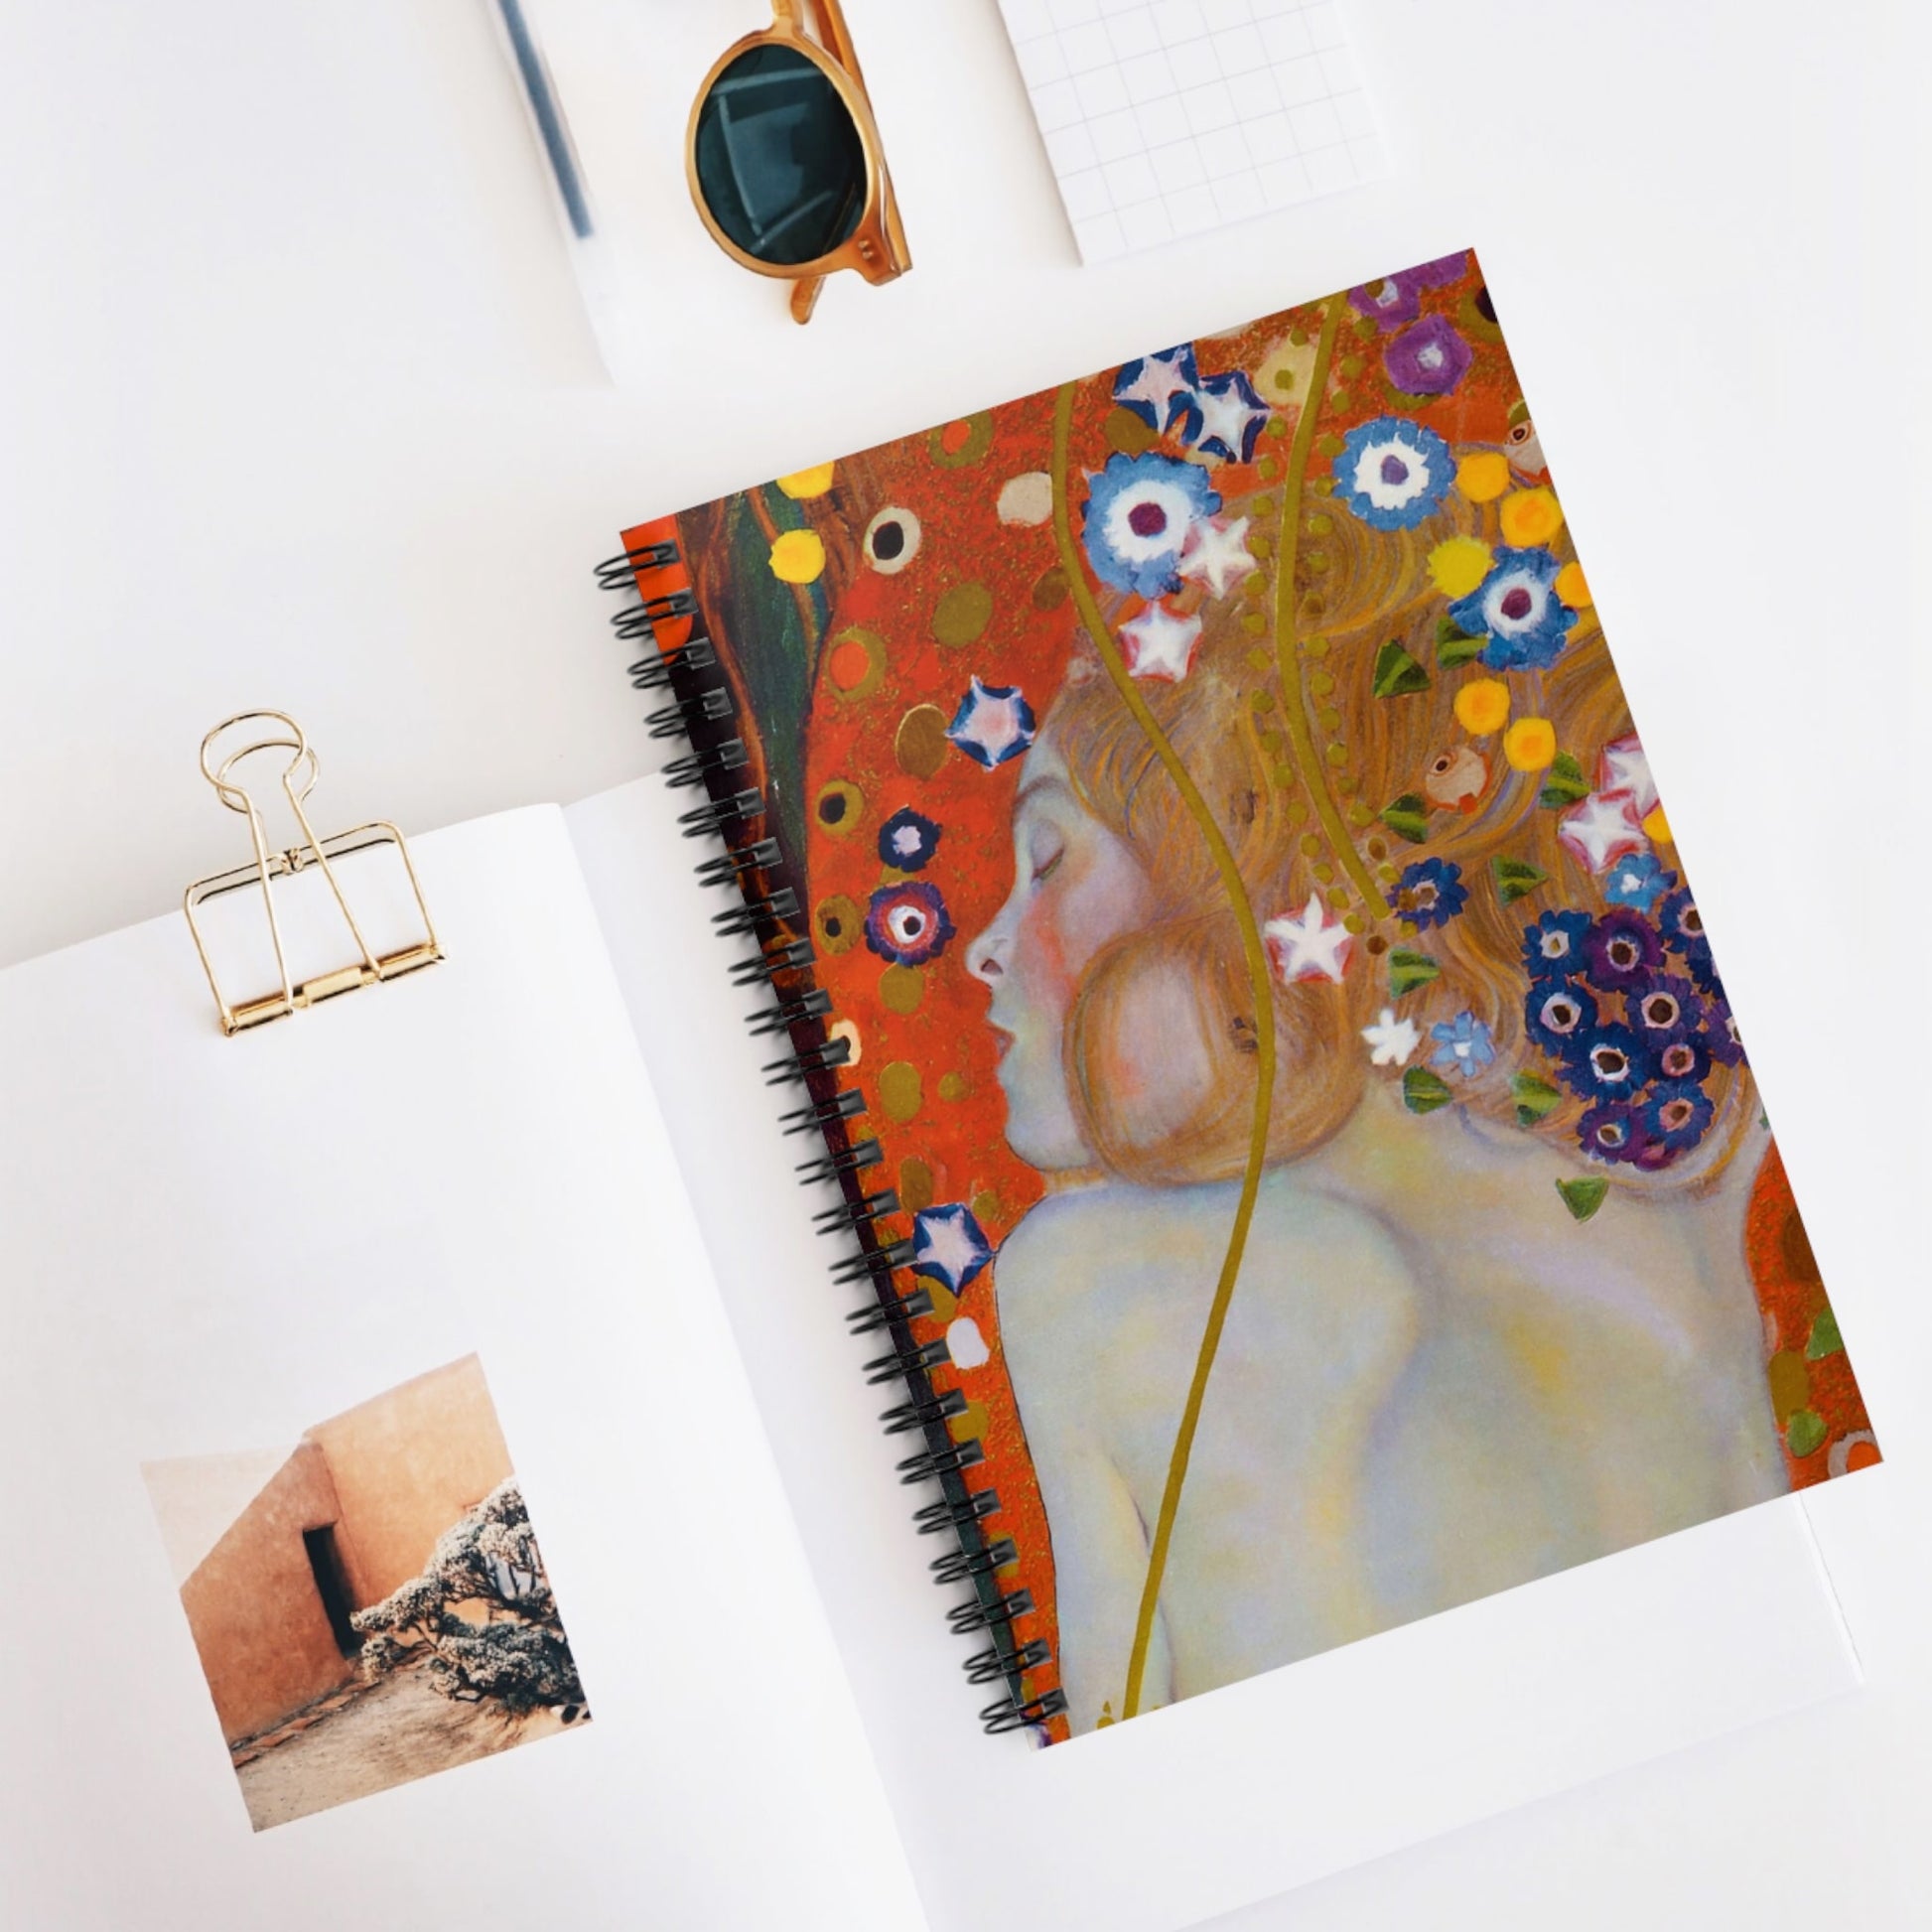 Woman with Flower Hair Spiral Notebook Displayed on Desk